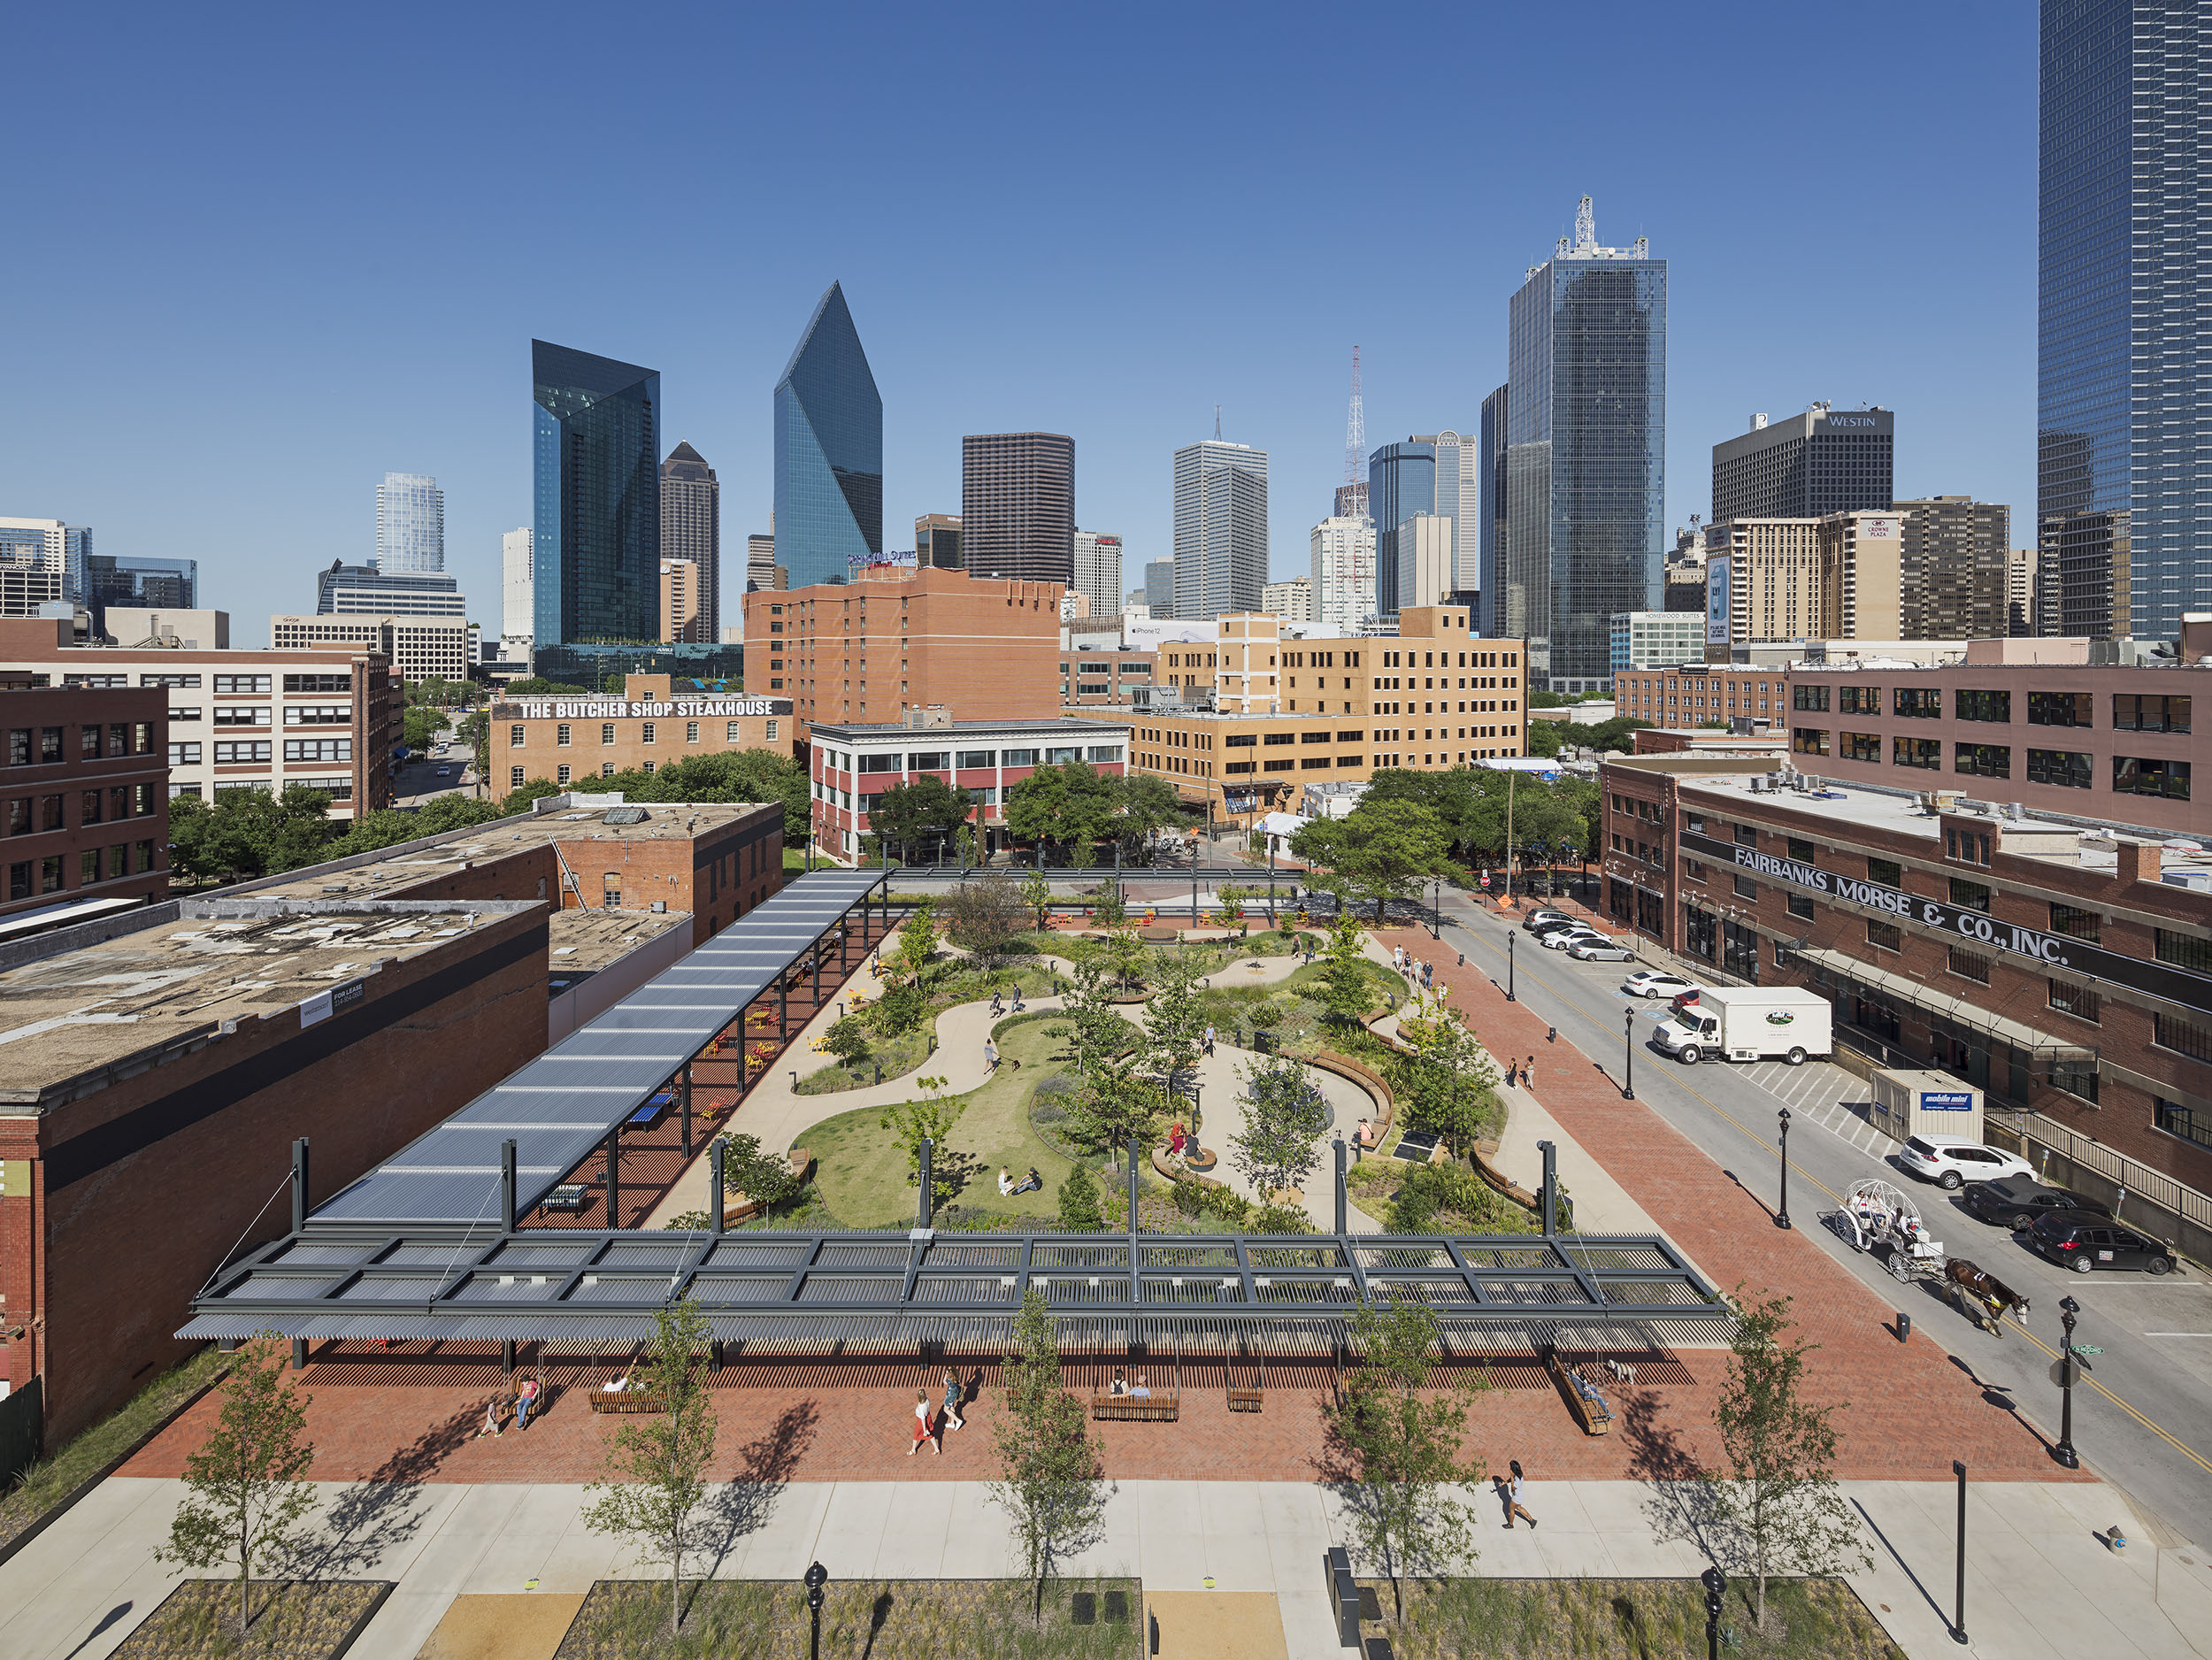 https://www.fieldoperations.net/fileadmin/fo_uploads/projects/West_End_Square/FO_WEST_END_SQUARE_02_Aerial_with_Downtown_Dallas_Sam_Oberter.jpg